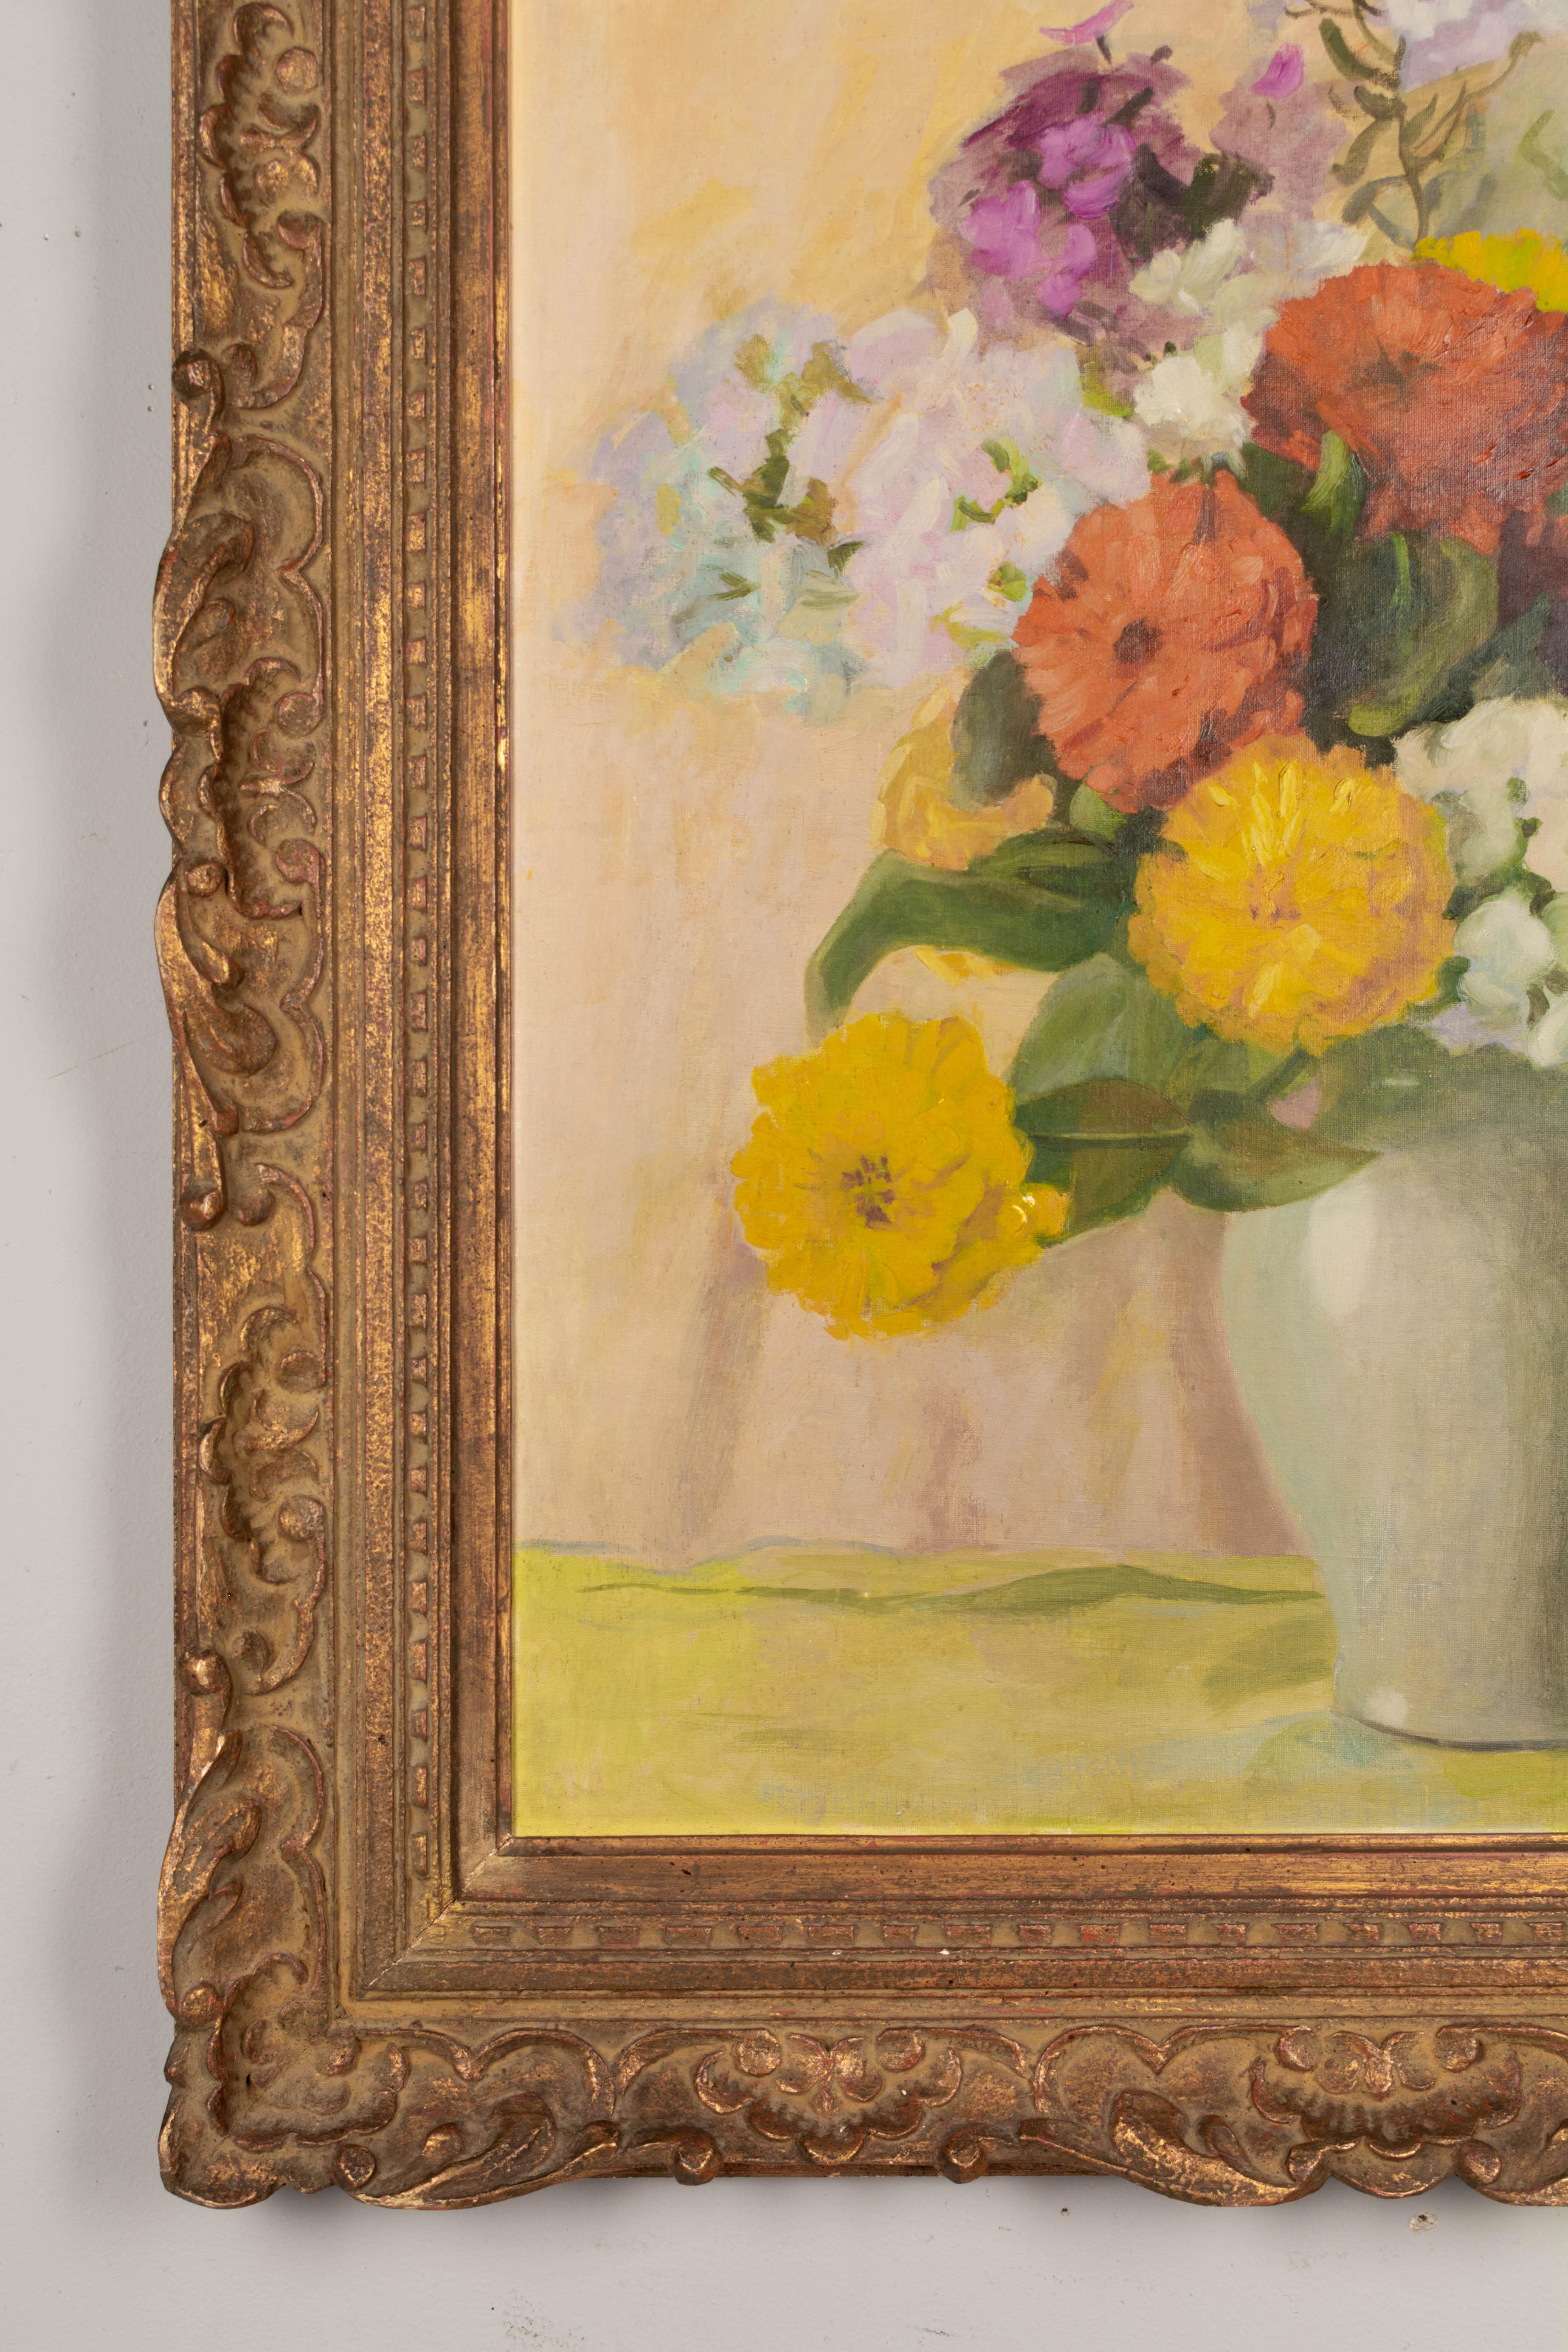 Hand-Painted Mid-Century Floral Still Life Painting For Sale